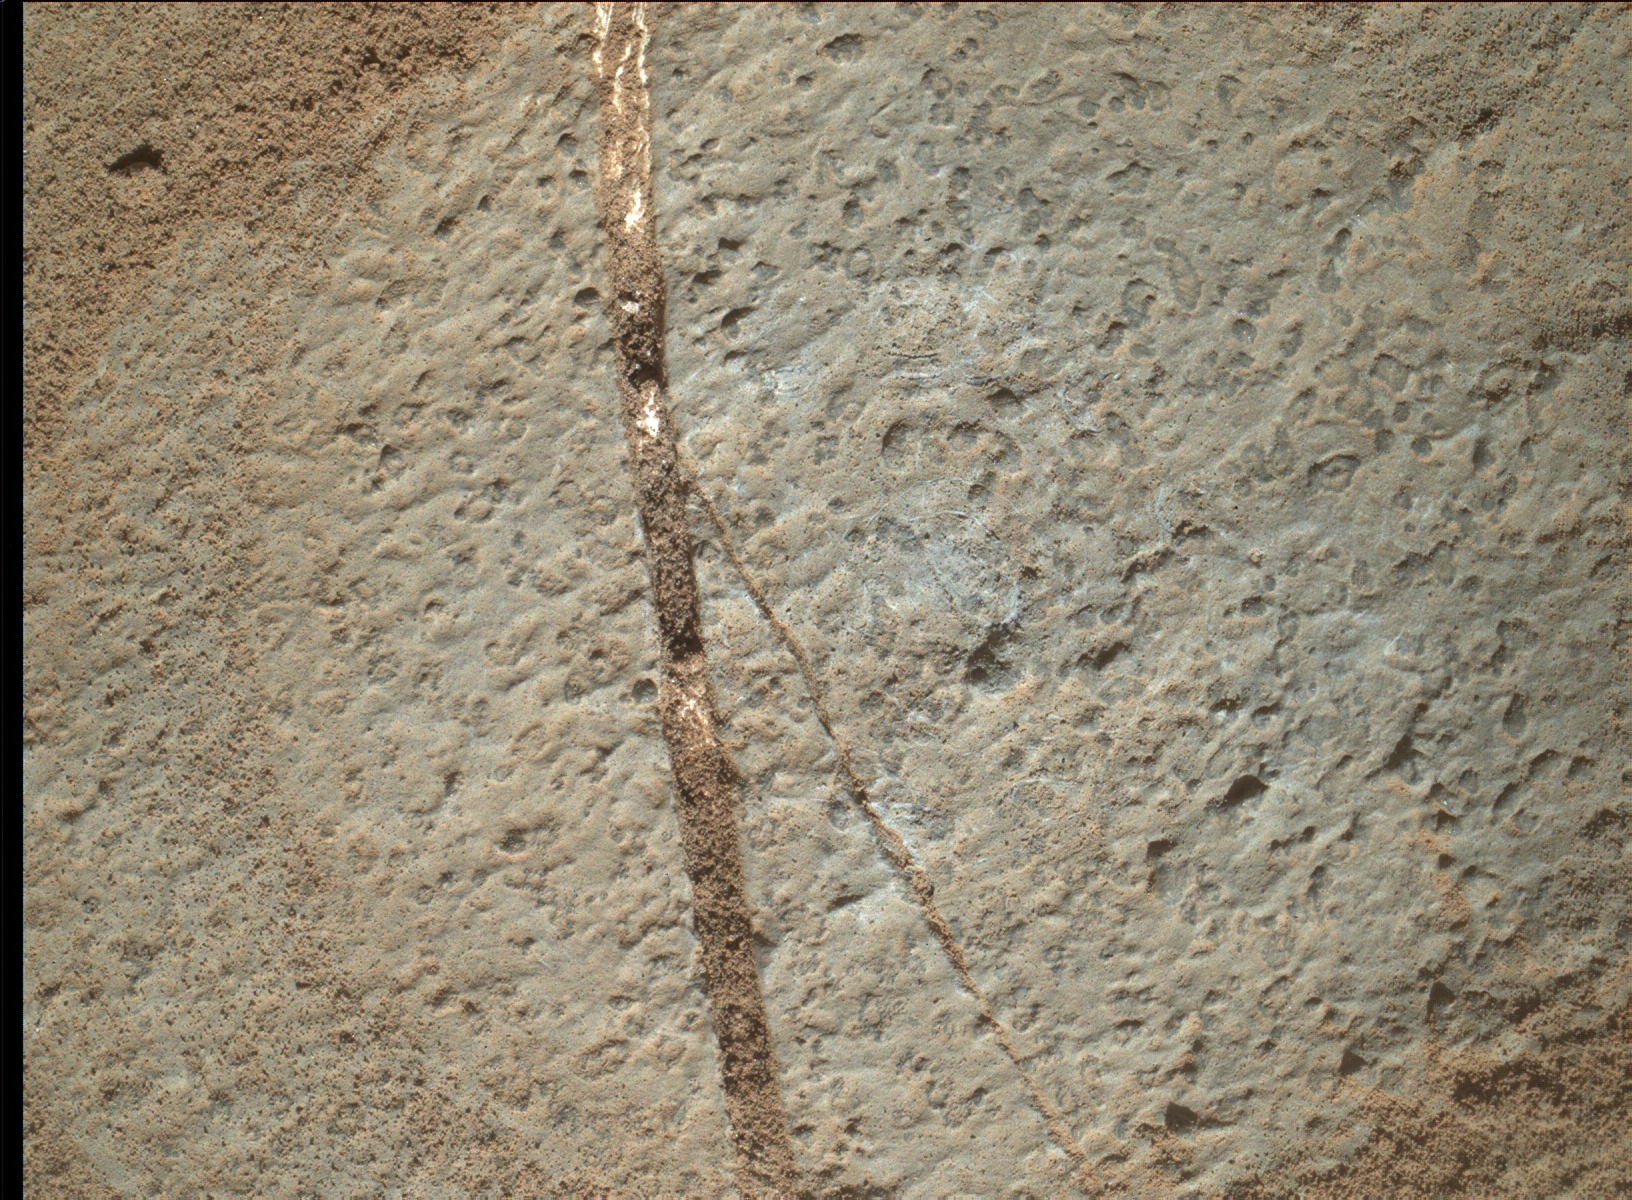 Nasa's Mars rover Curiosity acquired this image using its Mars Hand Lens Imager (MAHLI) on Sol 1273